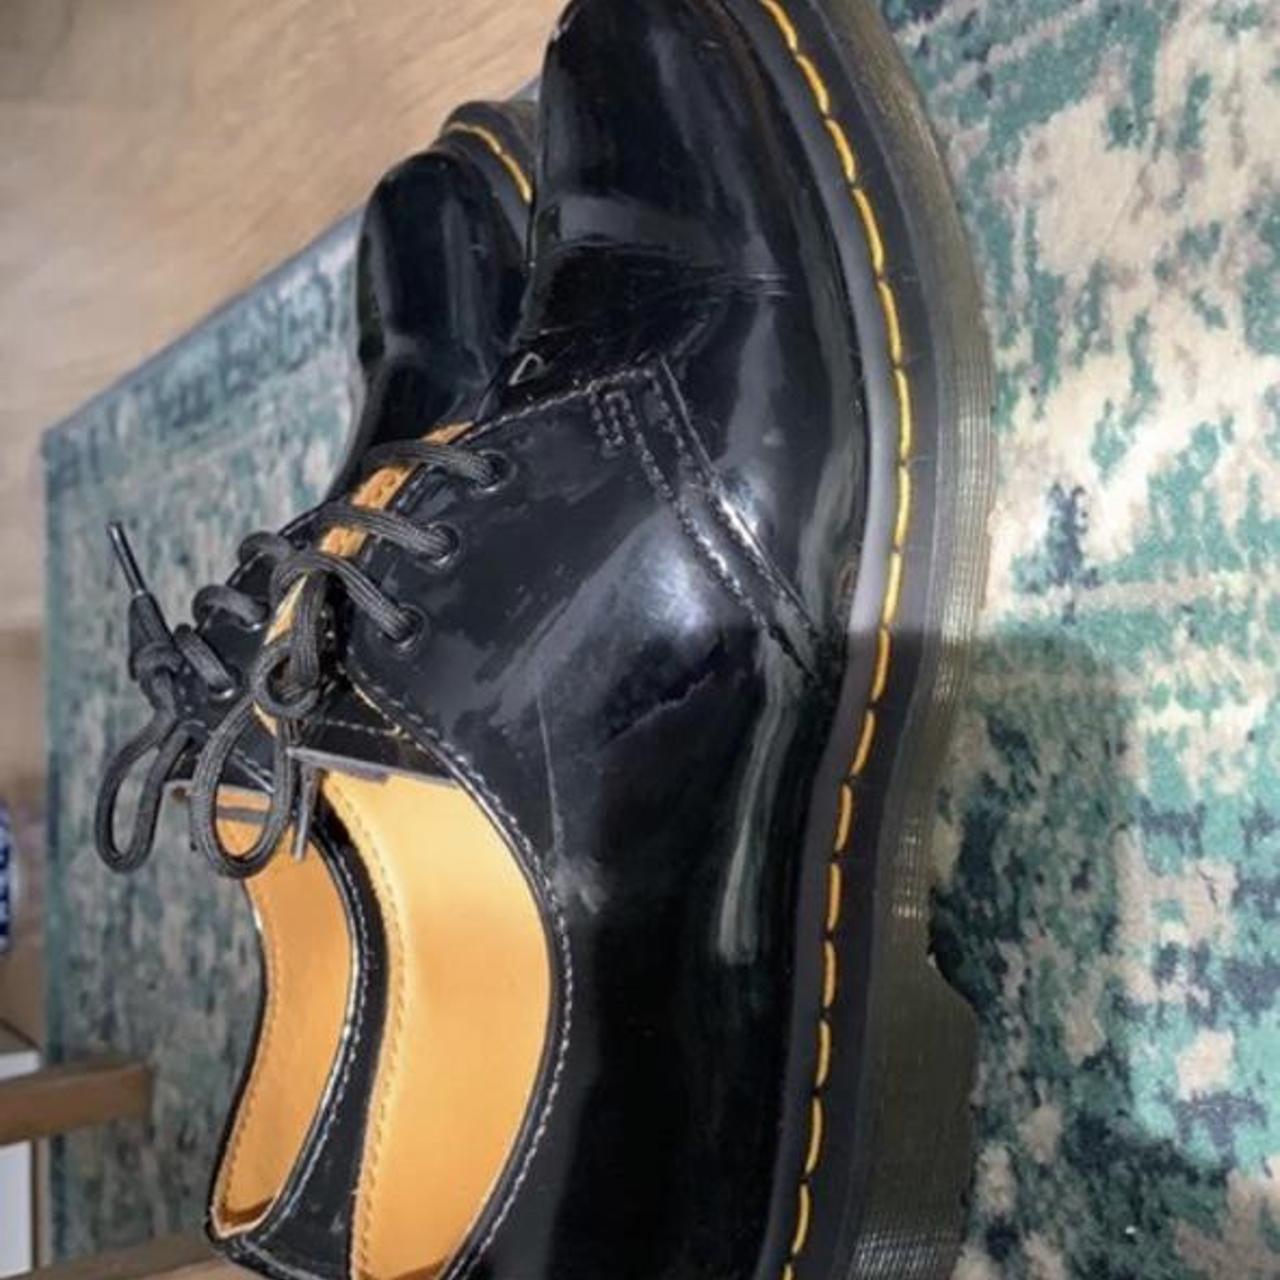 Product Image 3 - Doc martens 1461 patent. These